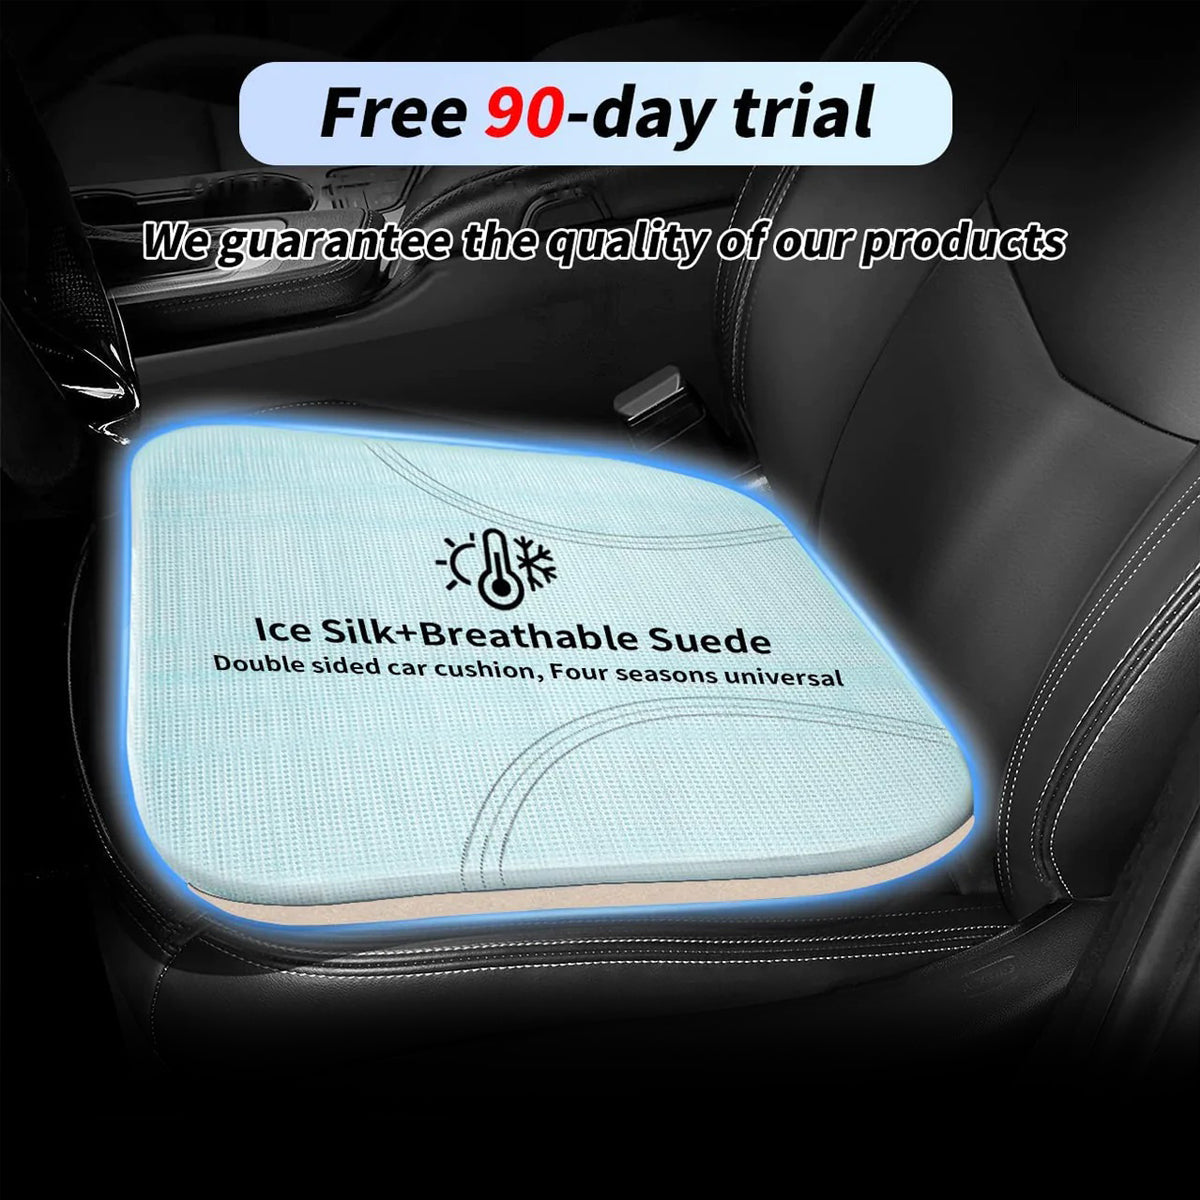 Car Seat Cushion, Custom For Cars, Car Memory Foam Seat Cushion, Heightening Seat Cushion, Seat Cushion for Car and Office Chair JG19999 - Delicate Leather